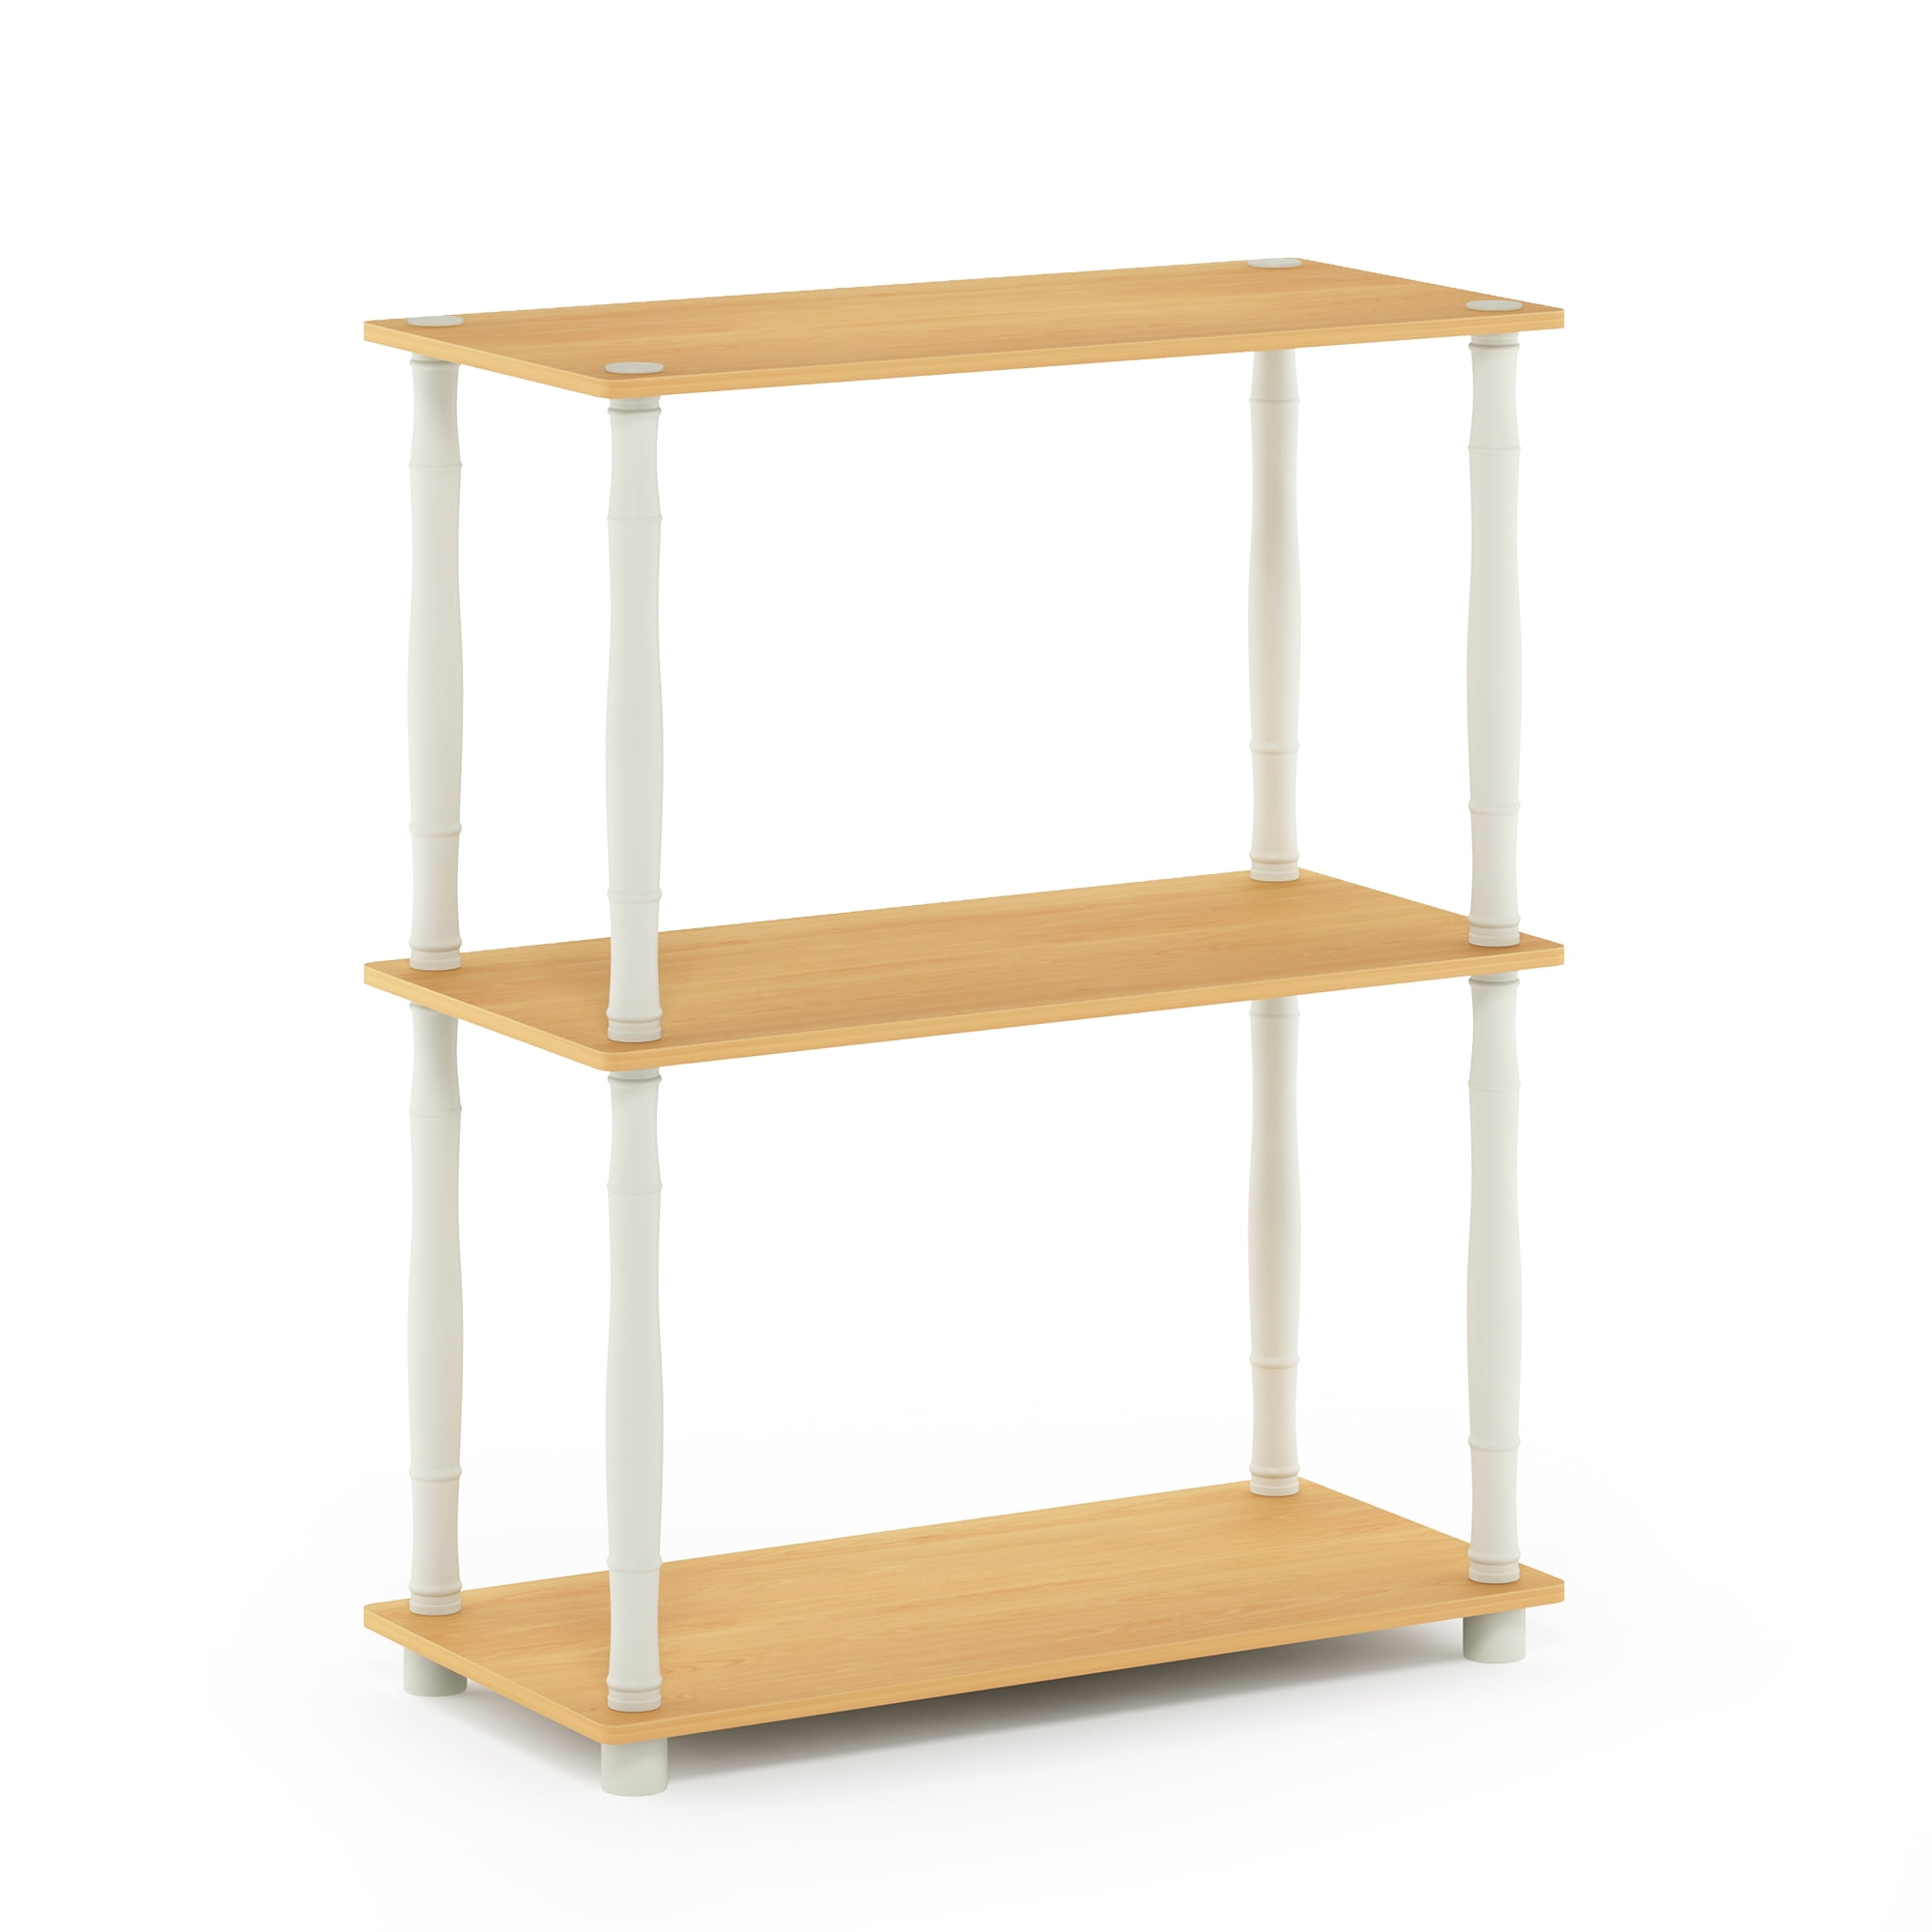 one size Wood FURINNO Toolless Shelves 